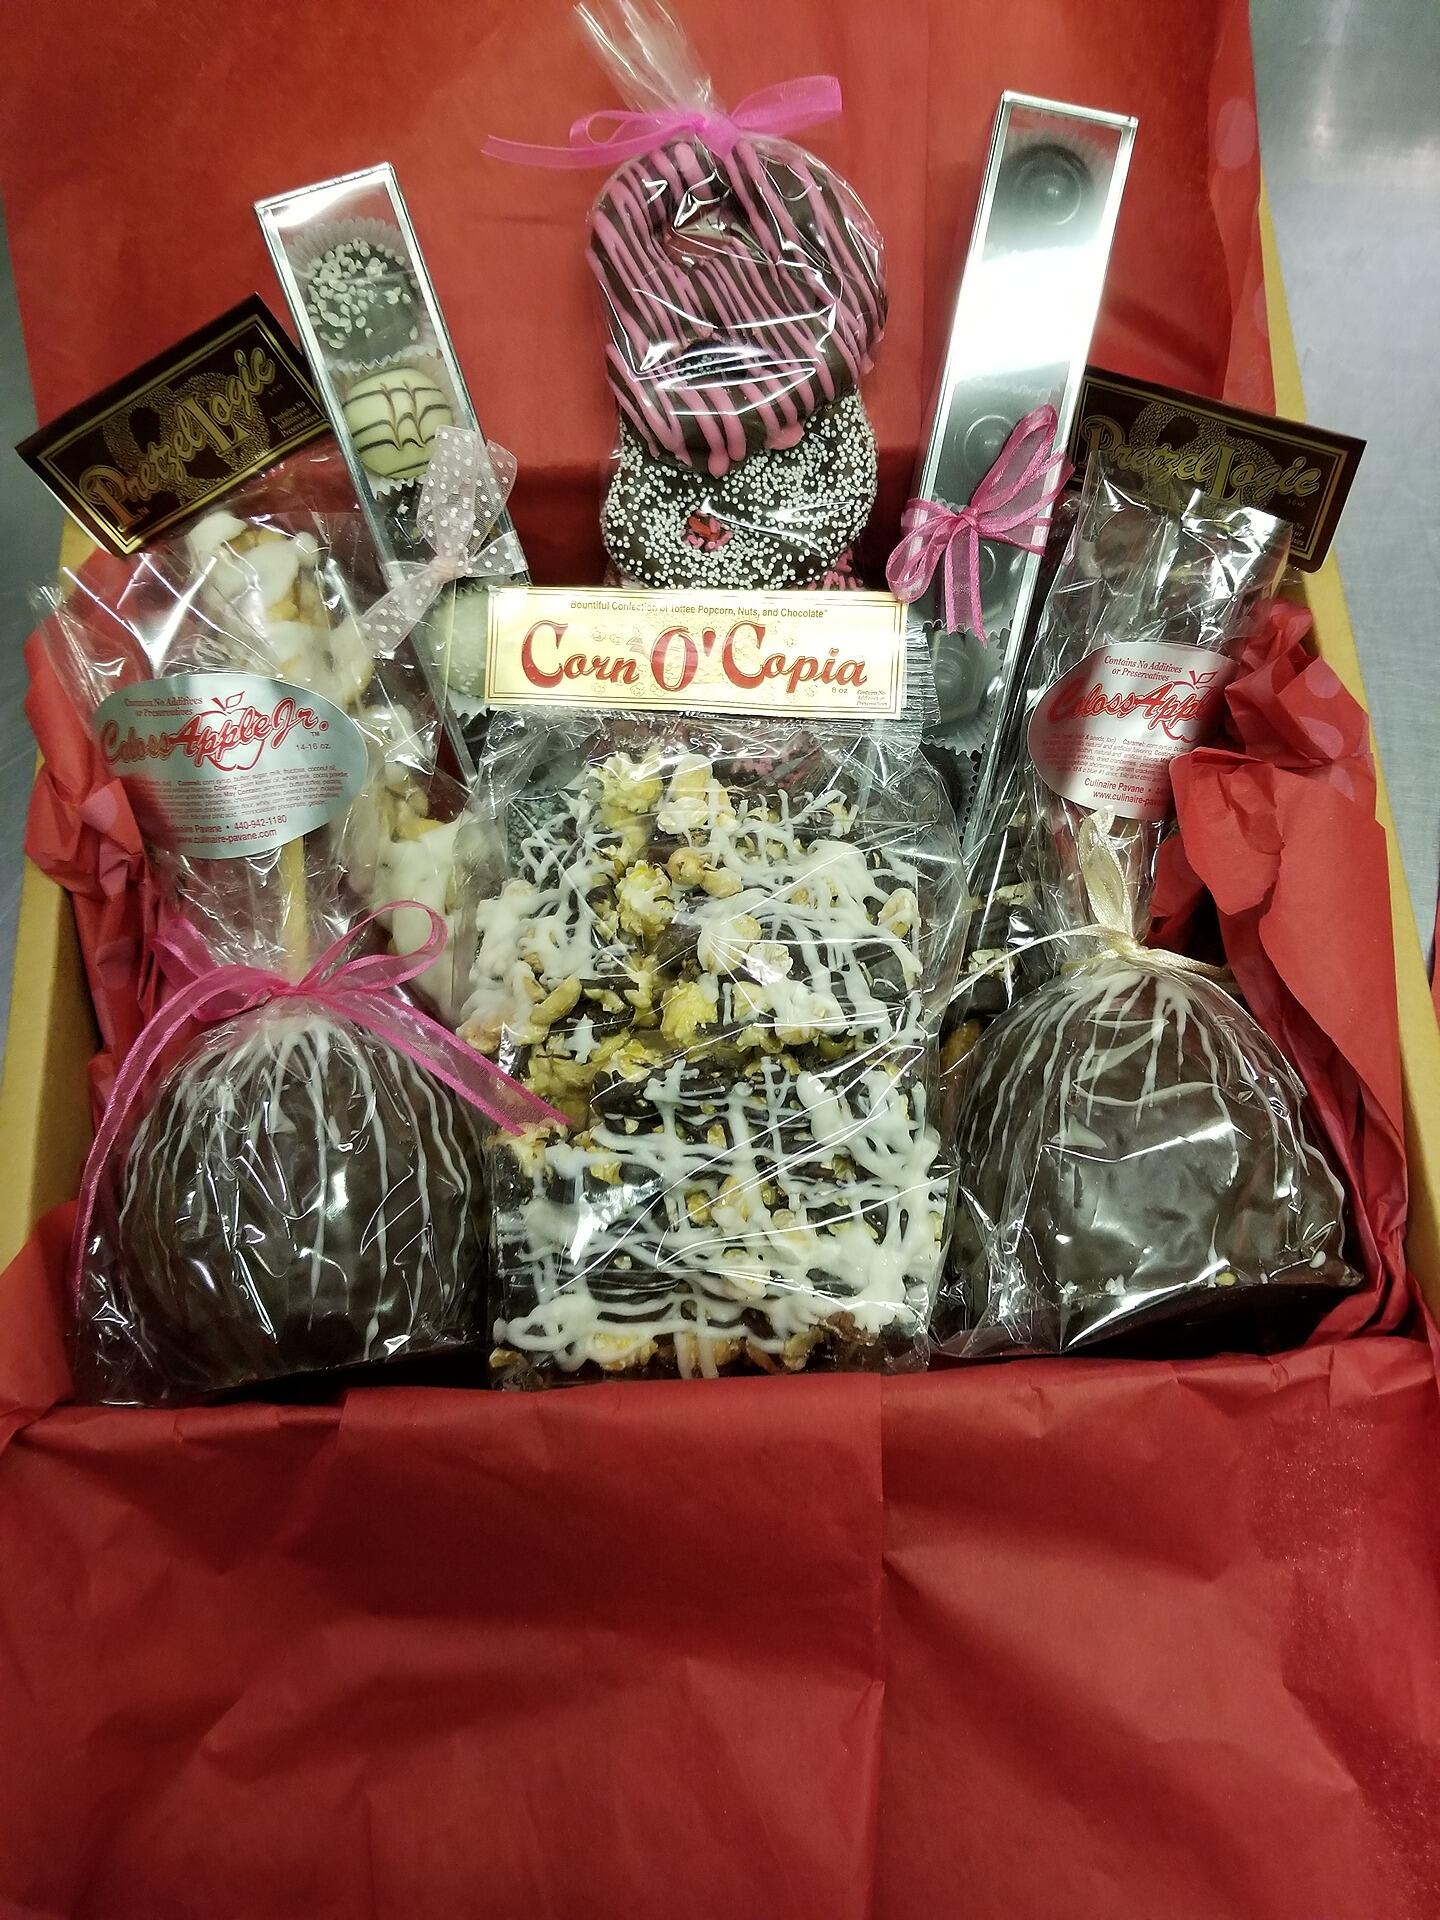 Handmade and wrapped gift basket of delicious chocolate treats for someone special